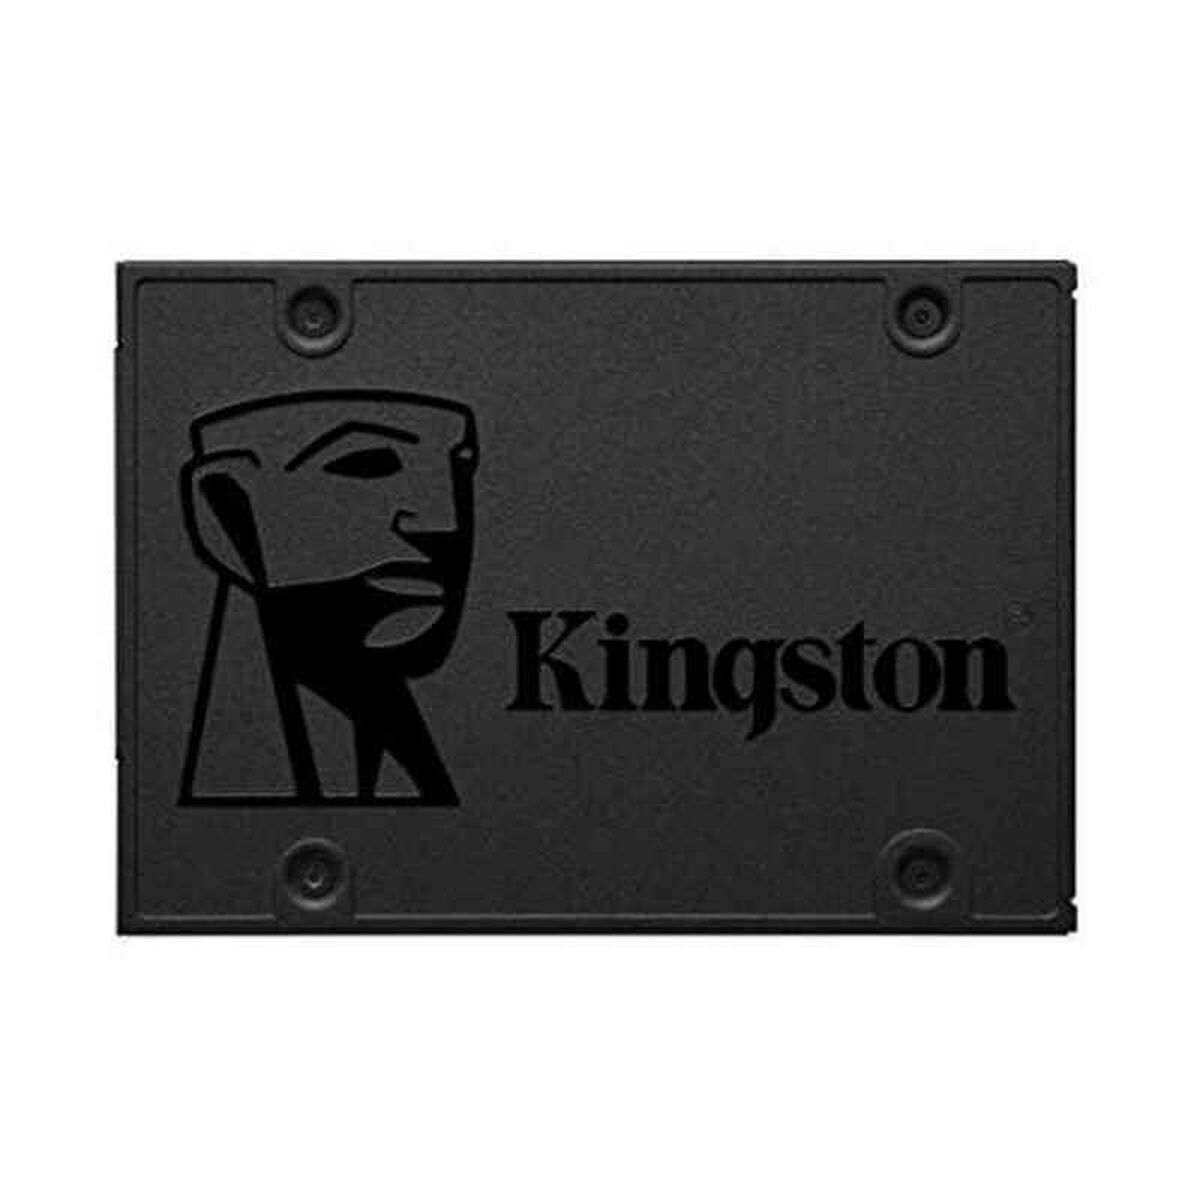 Hard Drive Kingston A400 SSD 2,5", Kingston, Computing, Data storage, hard-drive-kingston-a400-ssd-2-5, :120 GB, :2 TB, :480 GB, Brand_Kingston, Capacity_1.92 TB, Capacity_120 GB, Capacity_240 GB, Capacity_480 GB, Capacity_960 GB, category-reference-2609, category-reference-2803, category-reference-2806, category-reference-t-19685, category-reference-t-19909, category-reference-t-21357, computers / components, Condition_NEW, Price_20 - 50, Teleworking, RiotNook